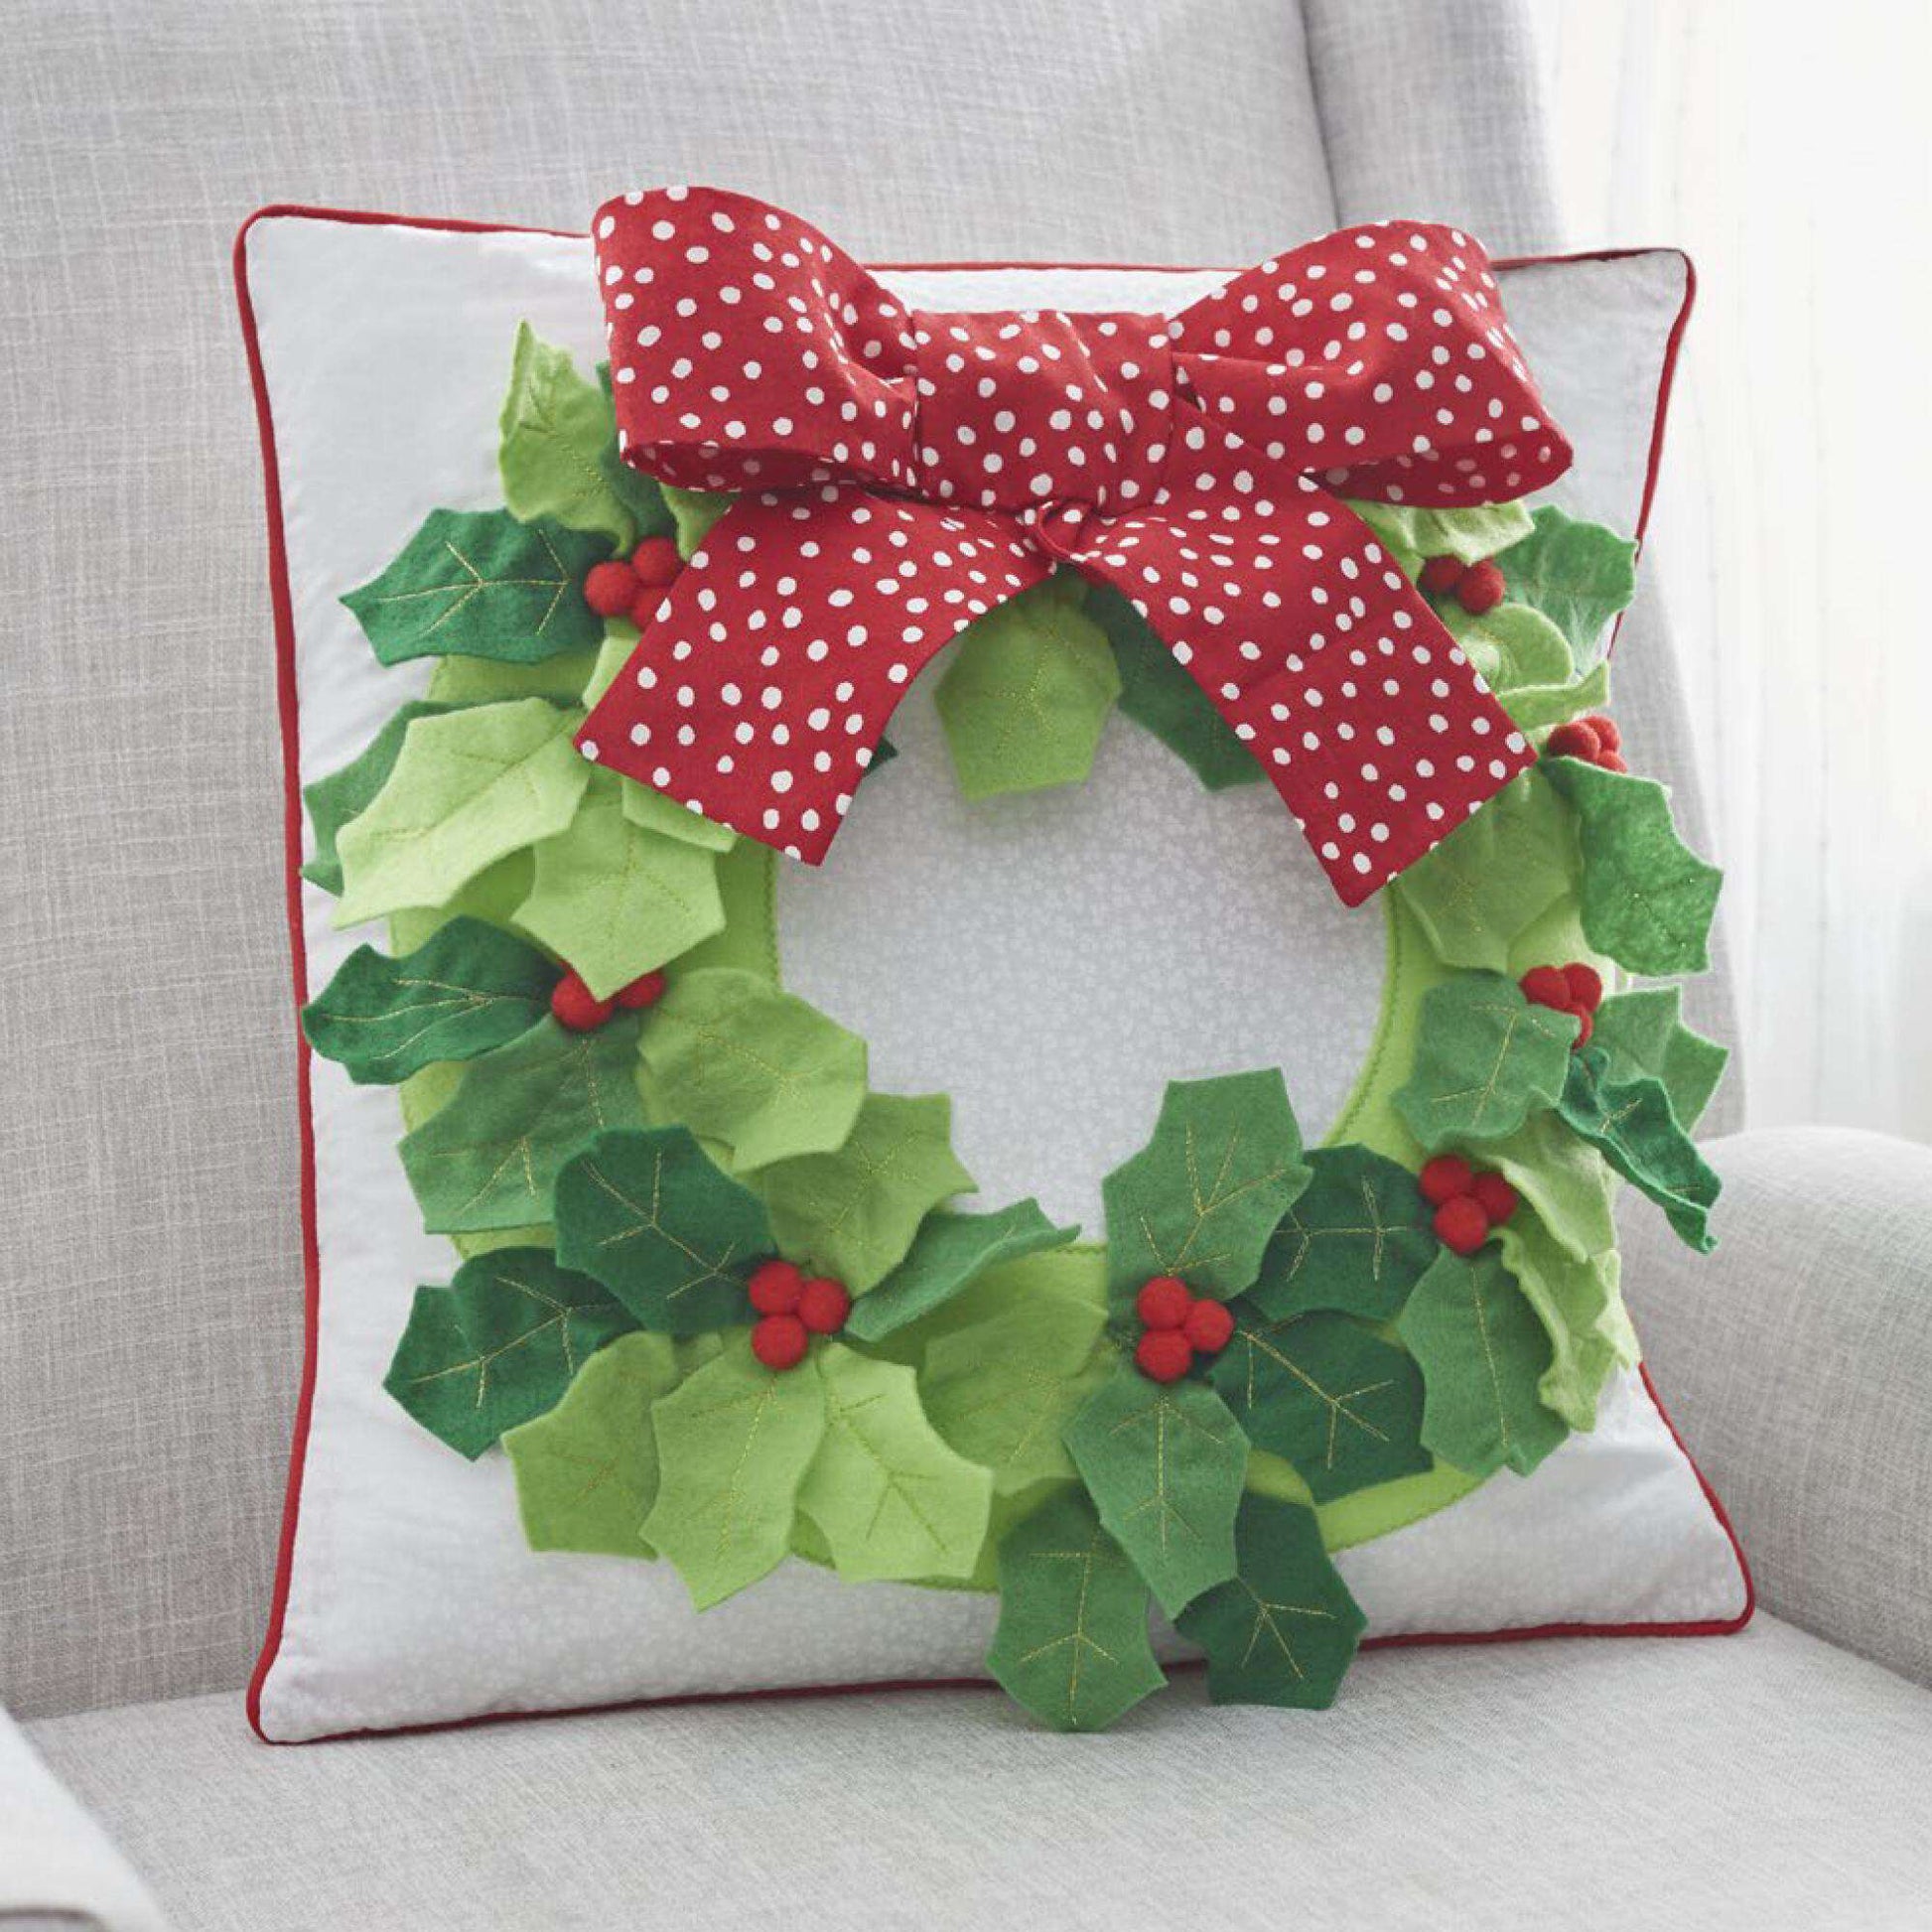 Free Coats & Clark Holly Wreath Pillow Sewing Pattern